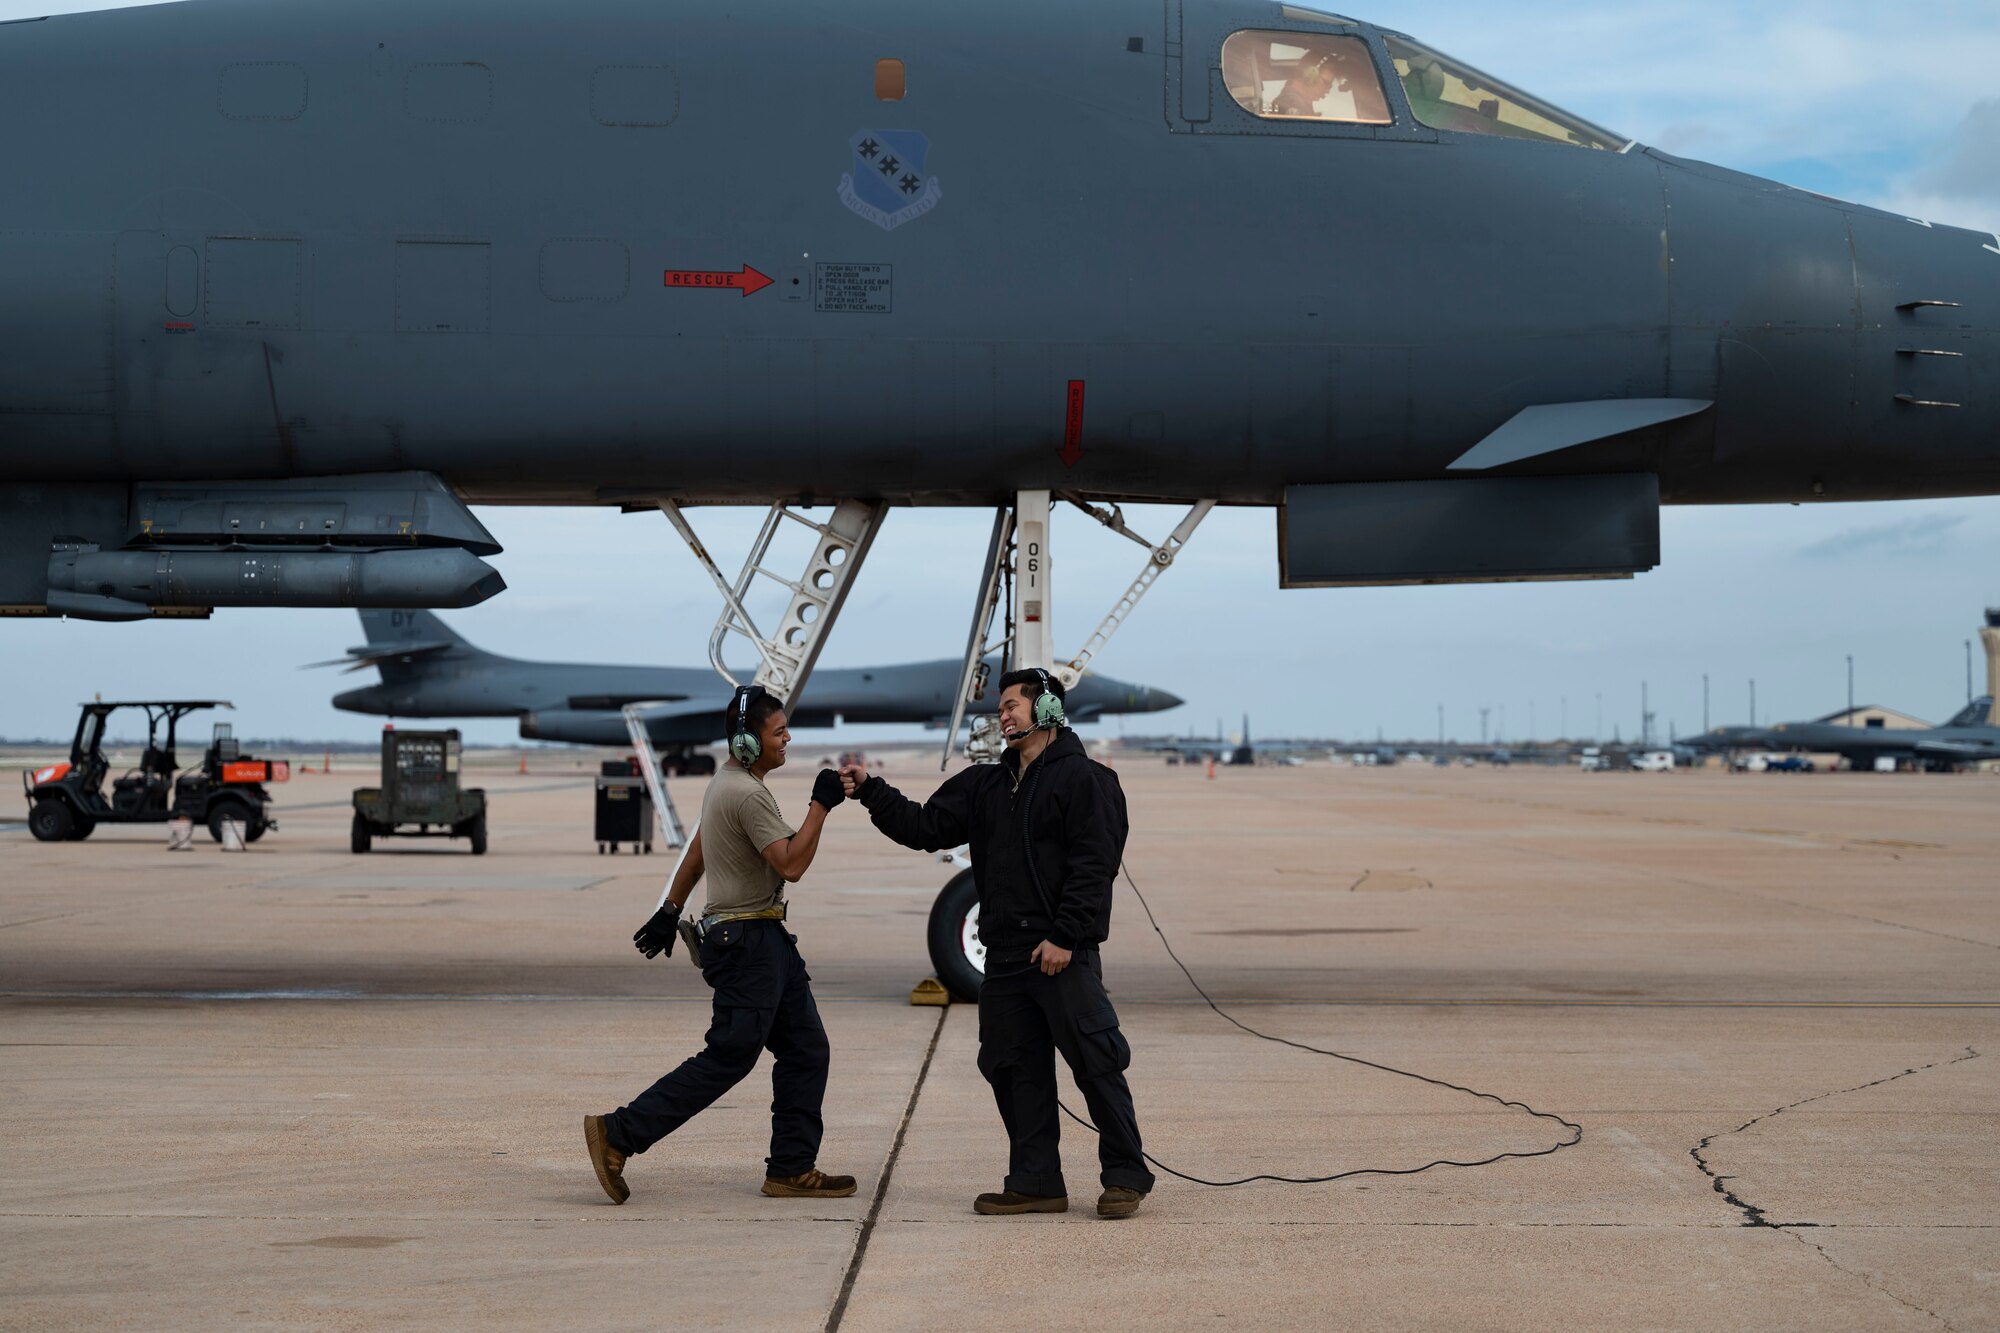 Two 7th Maintenance Group crew chiefs fistbump while conducting pre-flight maintenance checks on a B-1B Lancer at Dyess Air Force Base, Texas, March 22, 2023. In preparation for possible inclement weather, Dyess Airmen rapidly prepared over a dozen aircraft to relocate, successfully demonstrating America’s Lift and Strike Base’s ability to achieve dynamic force employment while using agile combat employment. The B-1s were temporarily relocated to Holloman Air Force Base, New Mexico, while the C-130s flew to several airfields throughout the United States. (U.S. Air Force photo by Airman Emma Anderson)